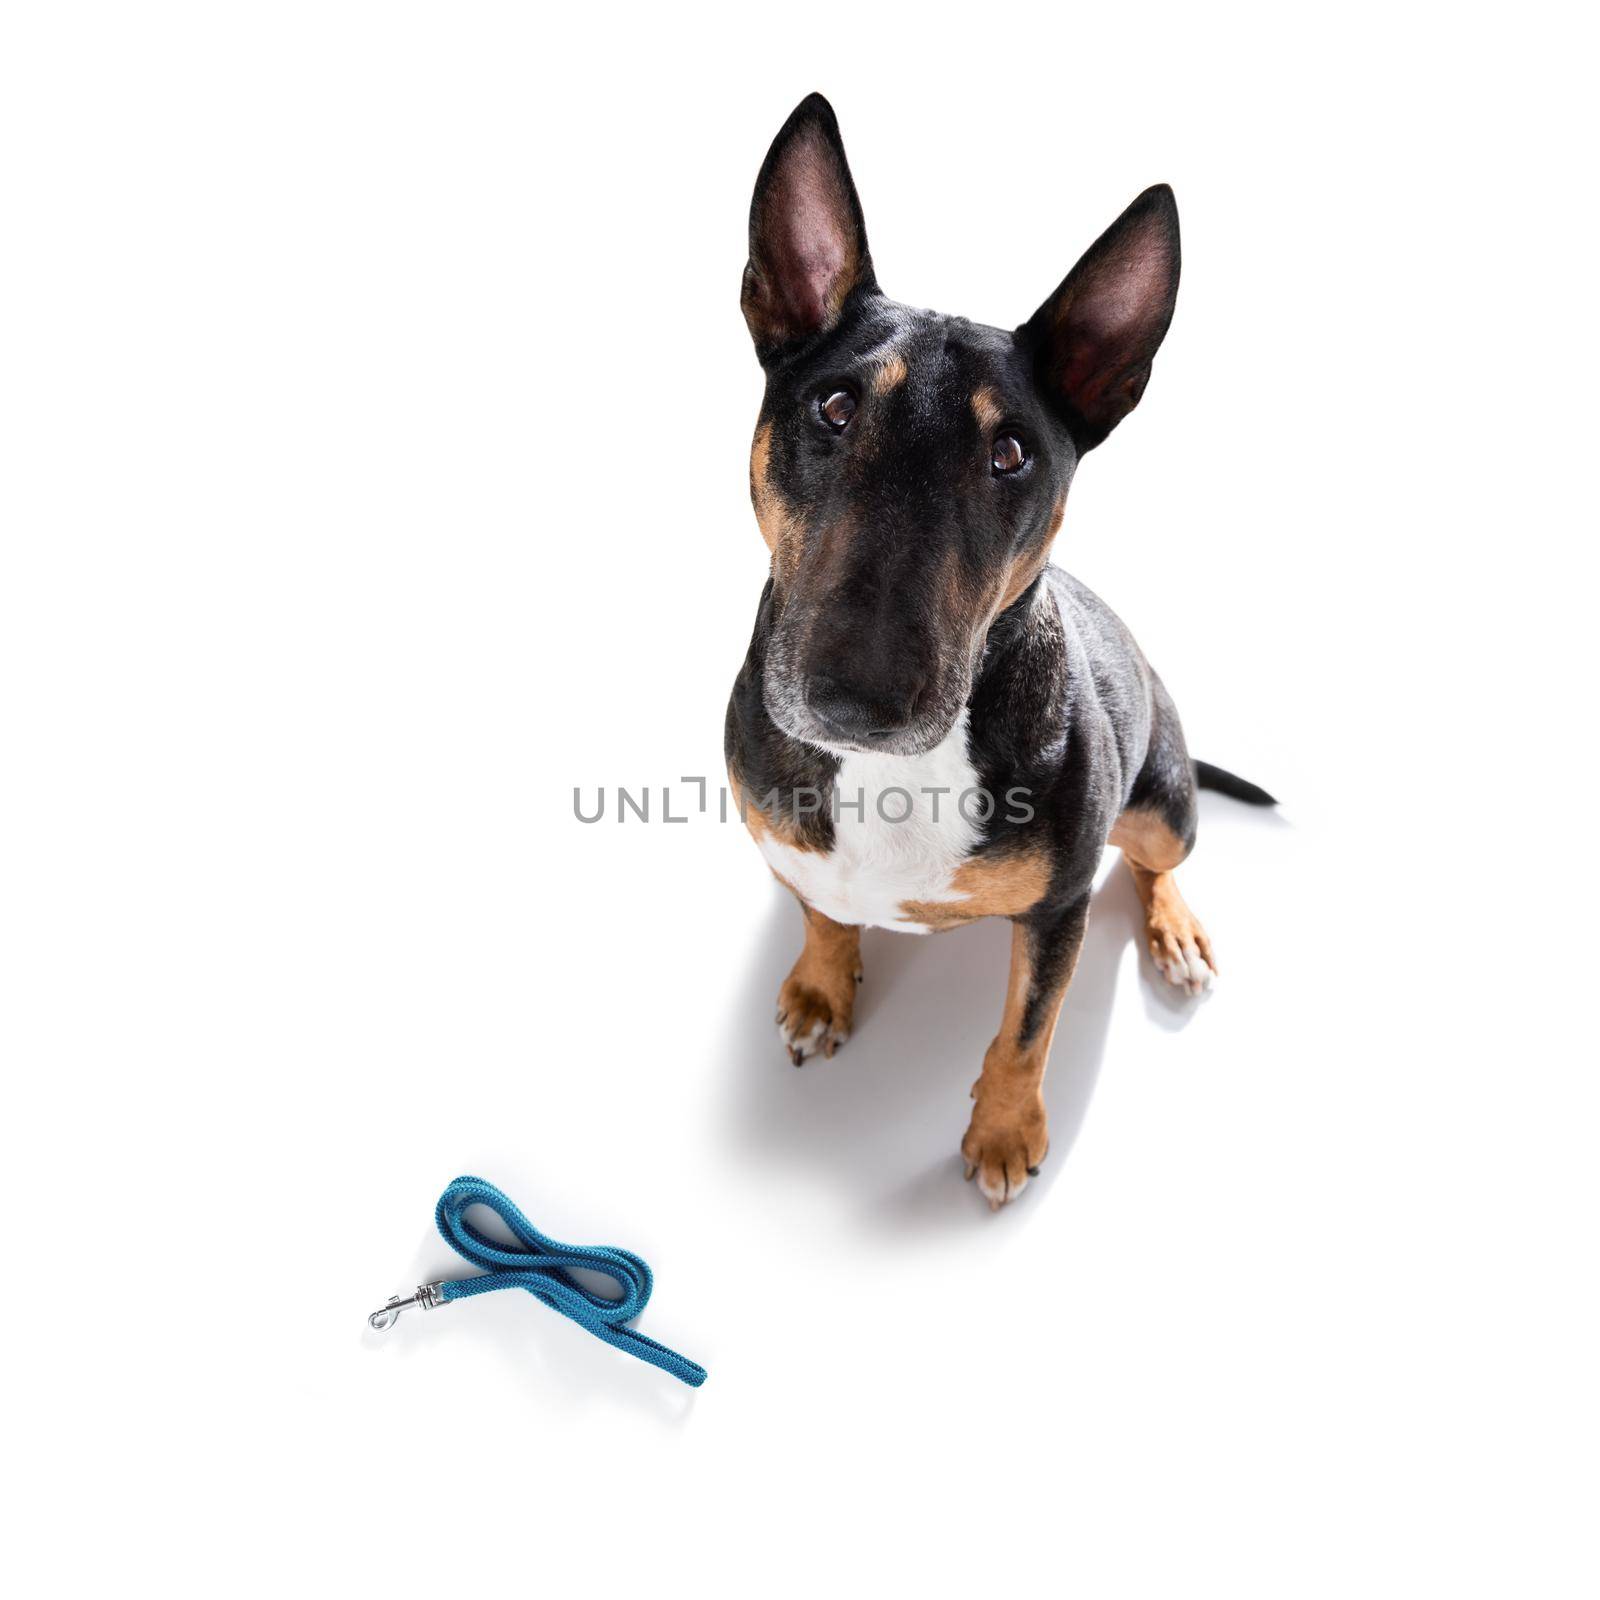 miniature Bull Terrier dog ready to walk with owner with leather leash , isolated on white background